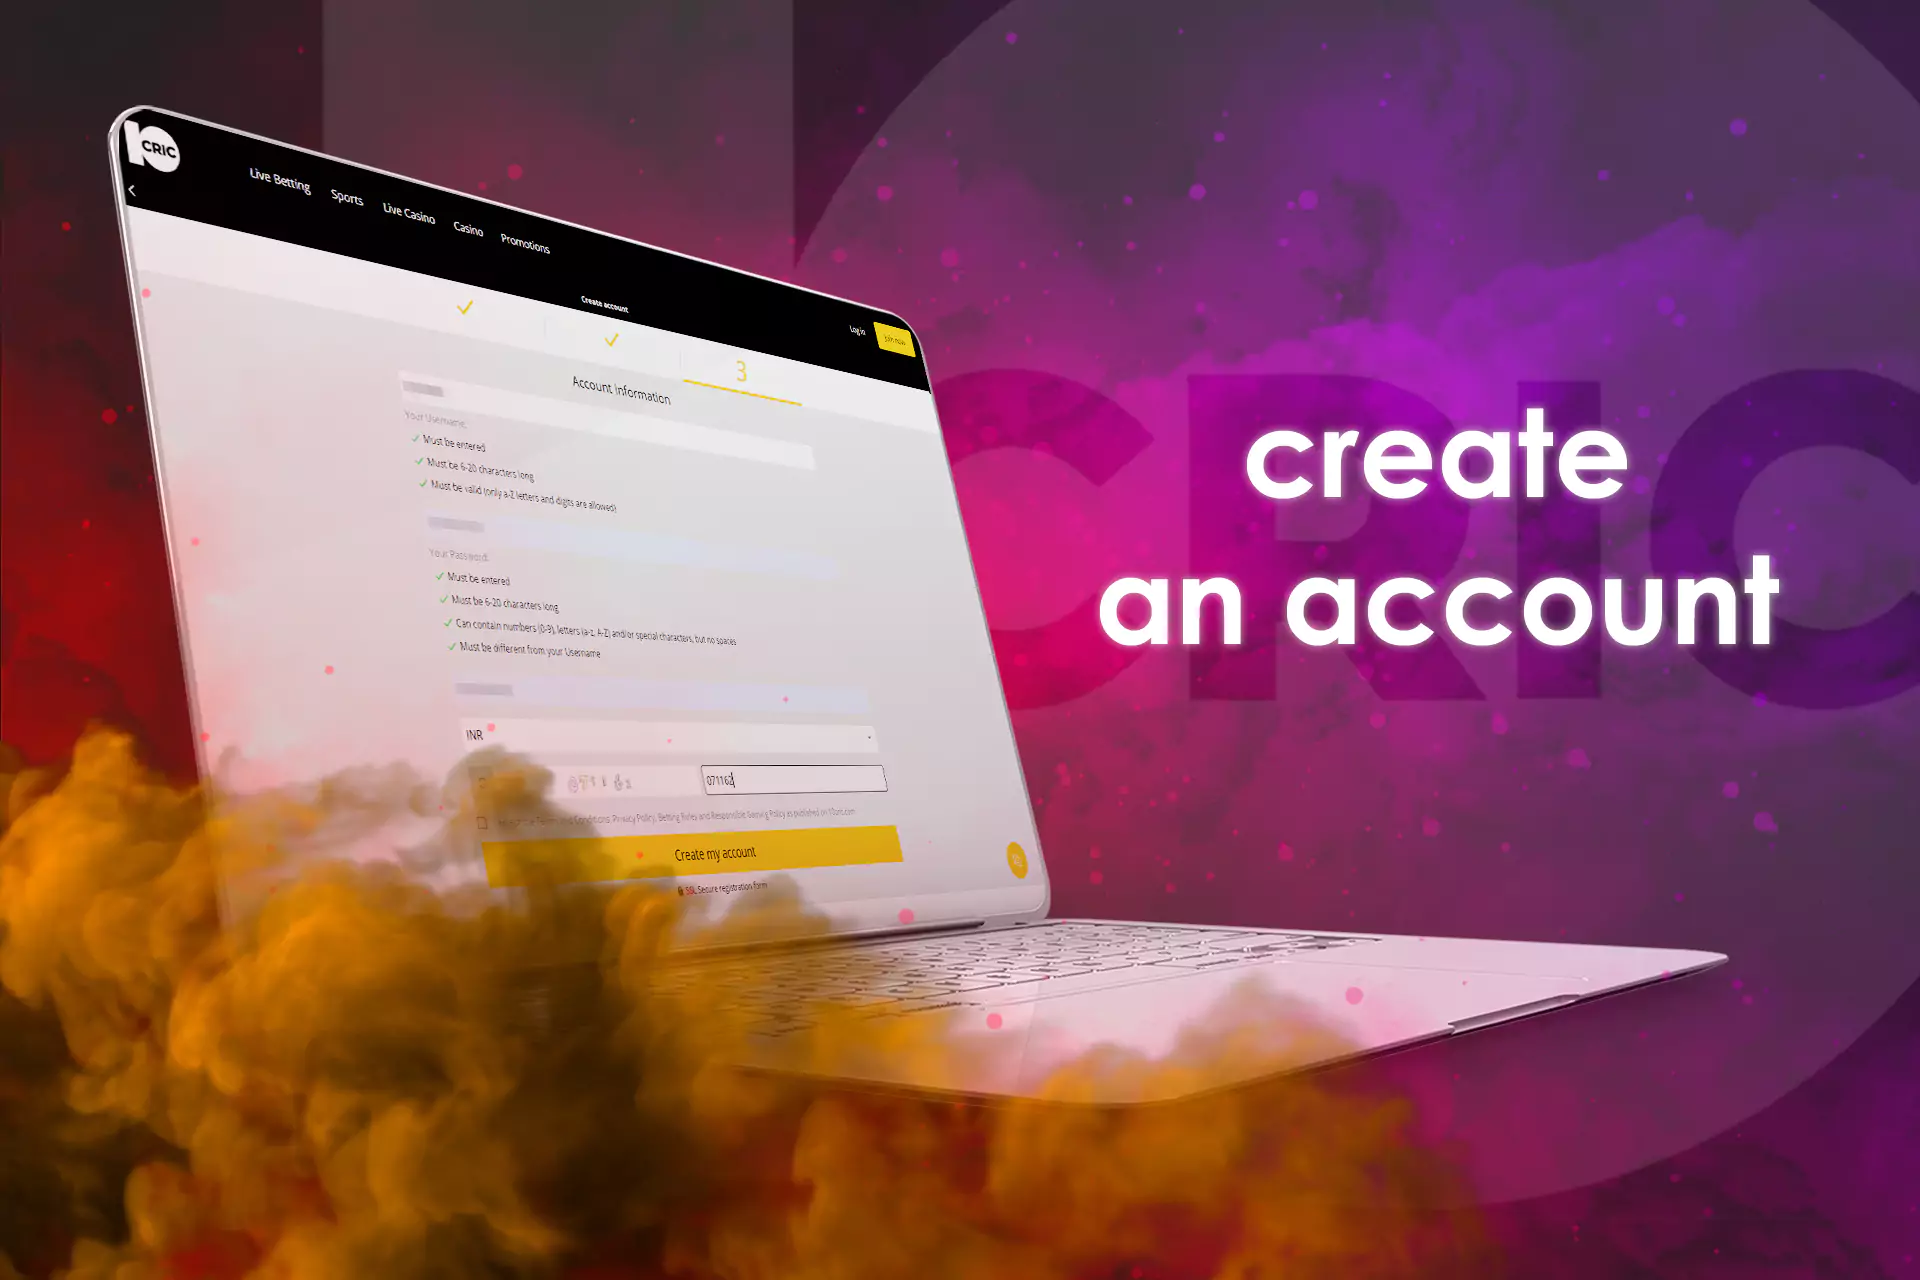 After you fill in all the fields, create an account.